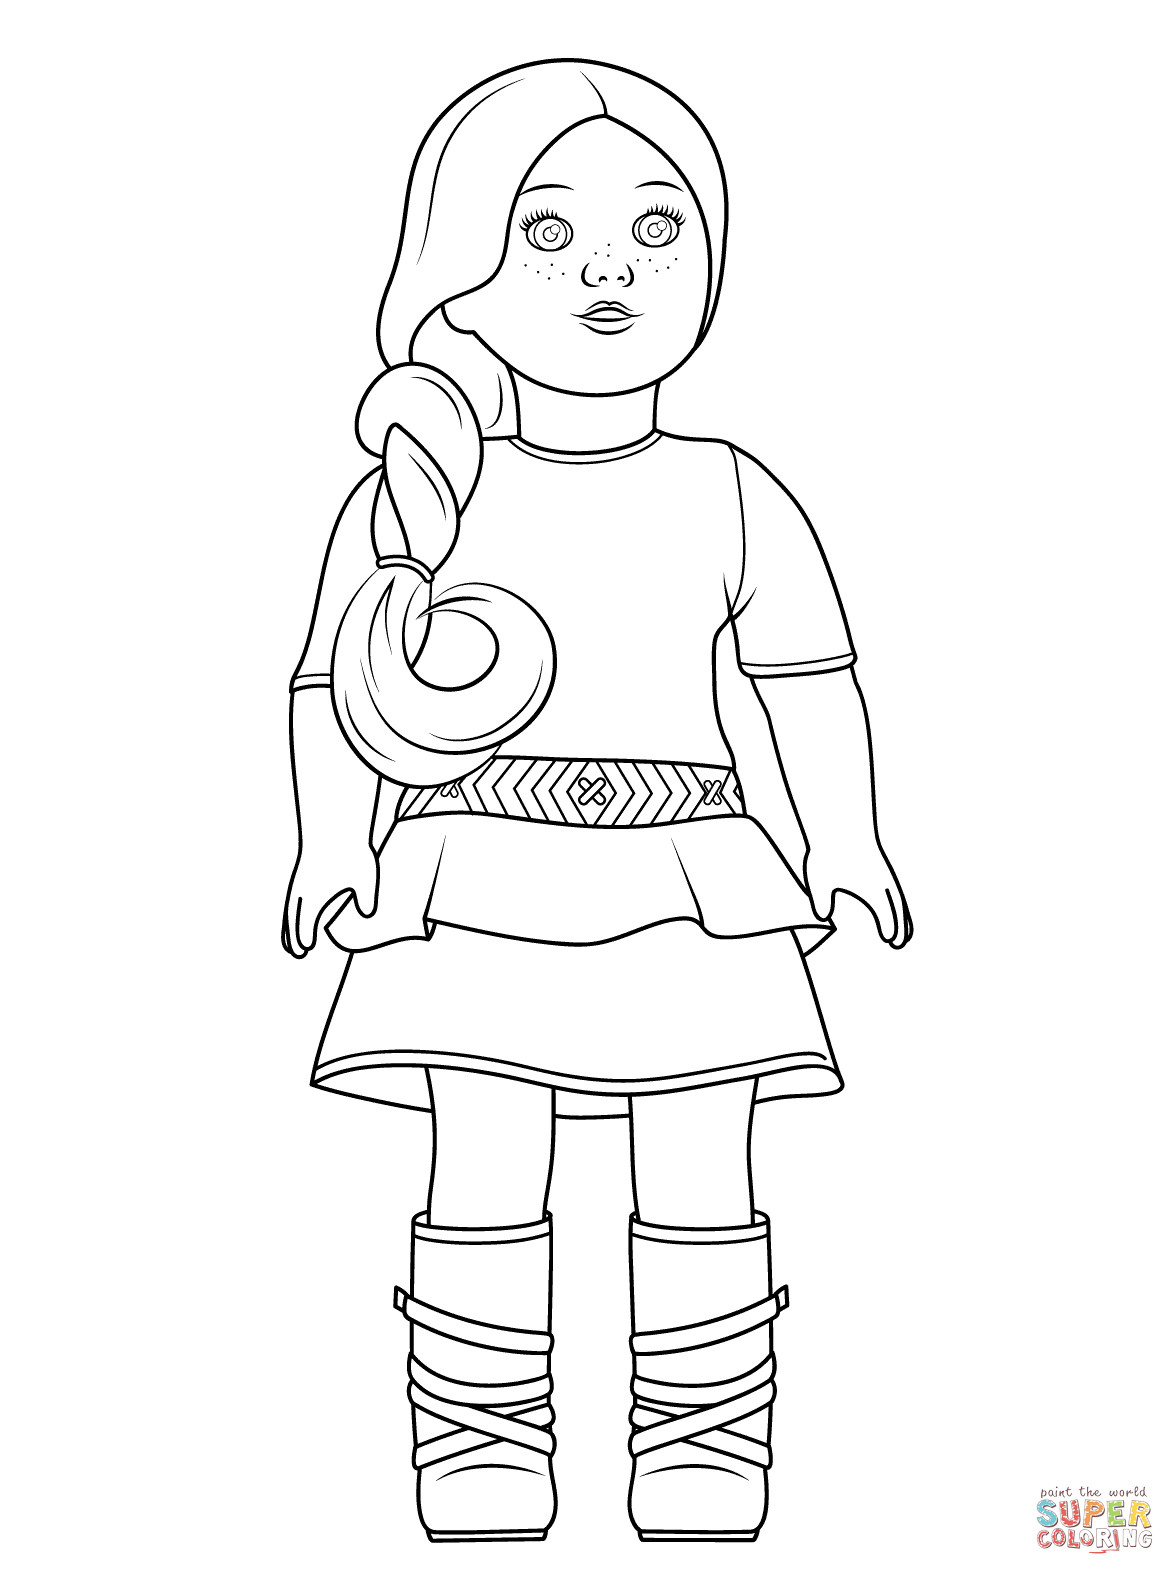 American Girl Isabelle Coloring Pages
 American Girl Saige coloring page